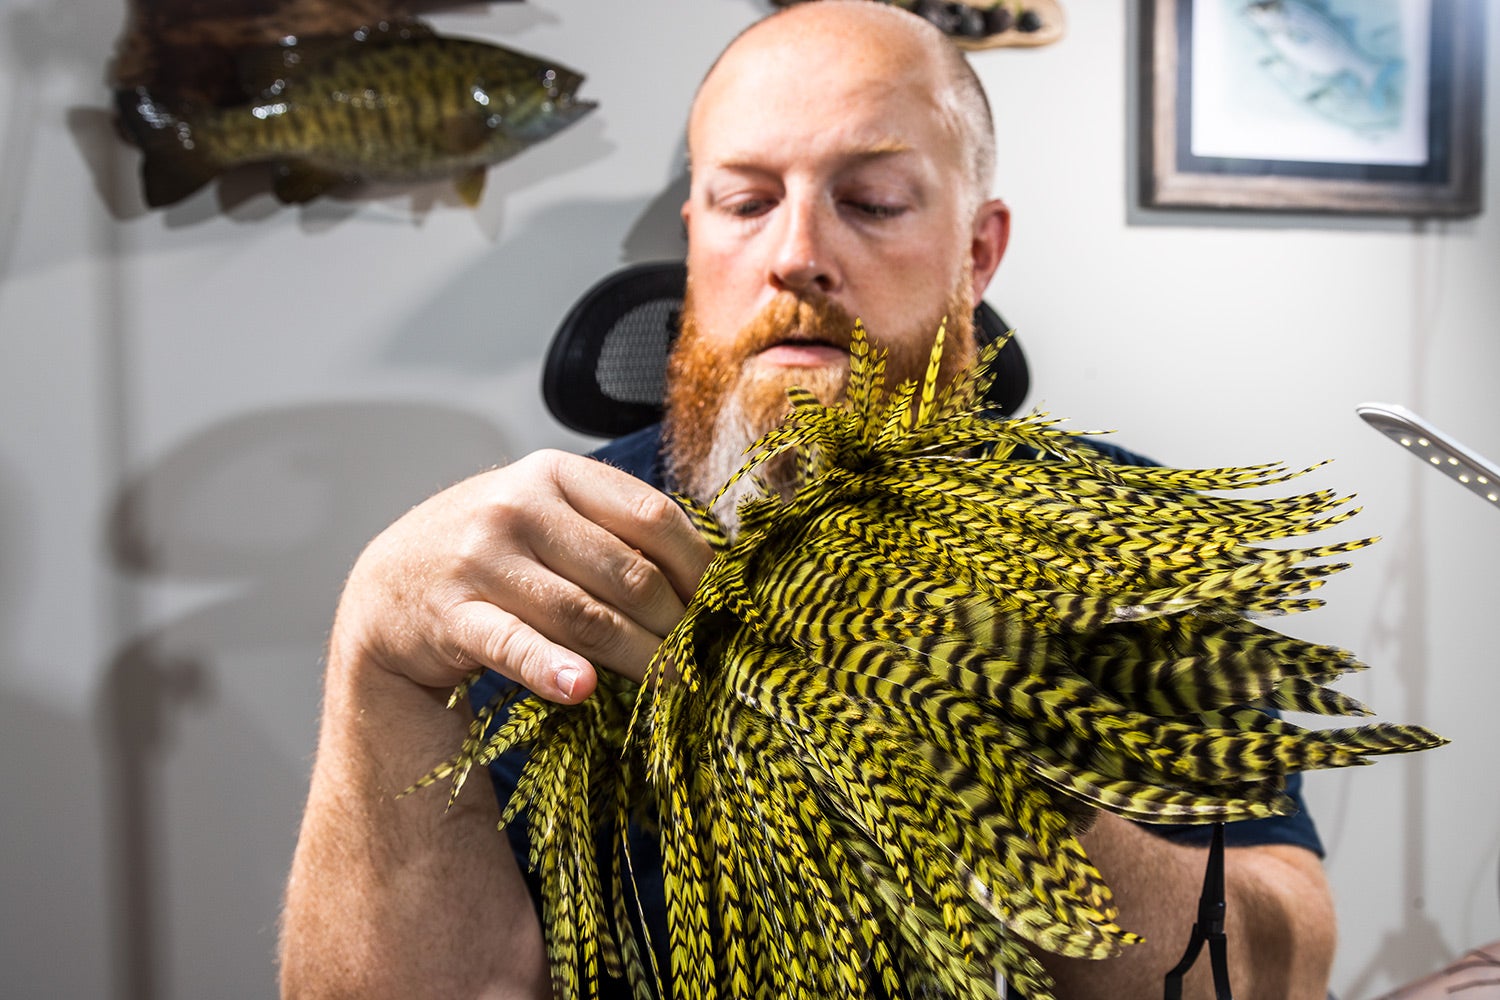 Fly-tier Brandon Bailes searches through feathers